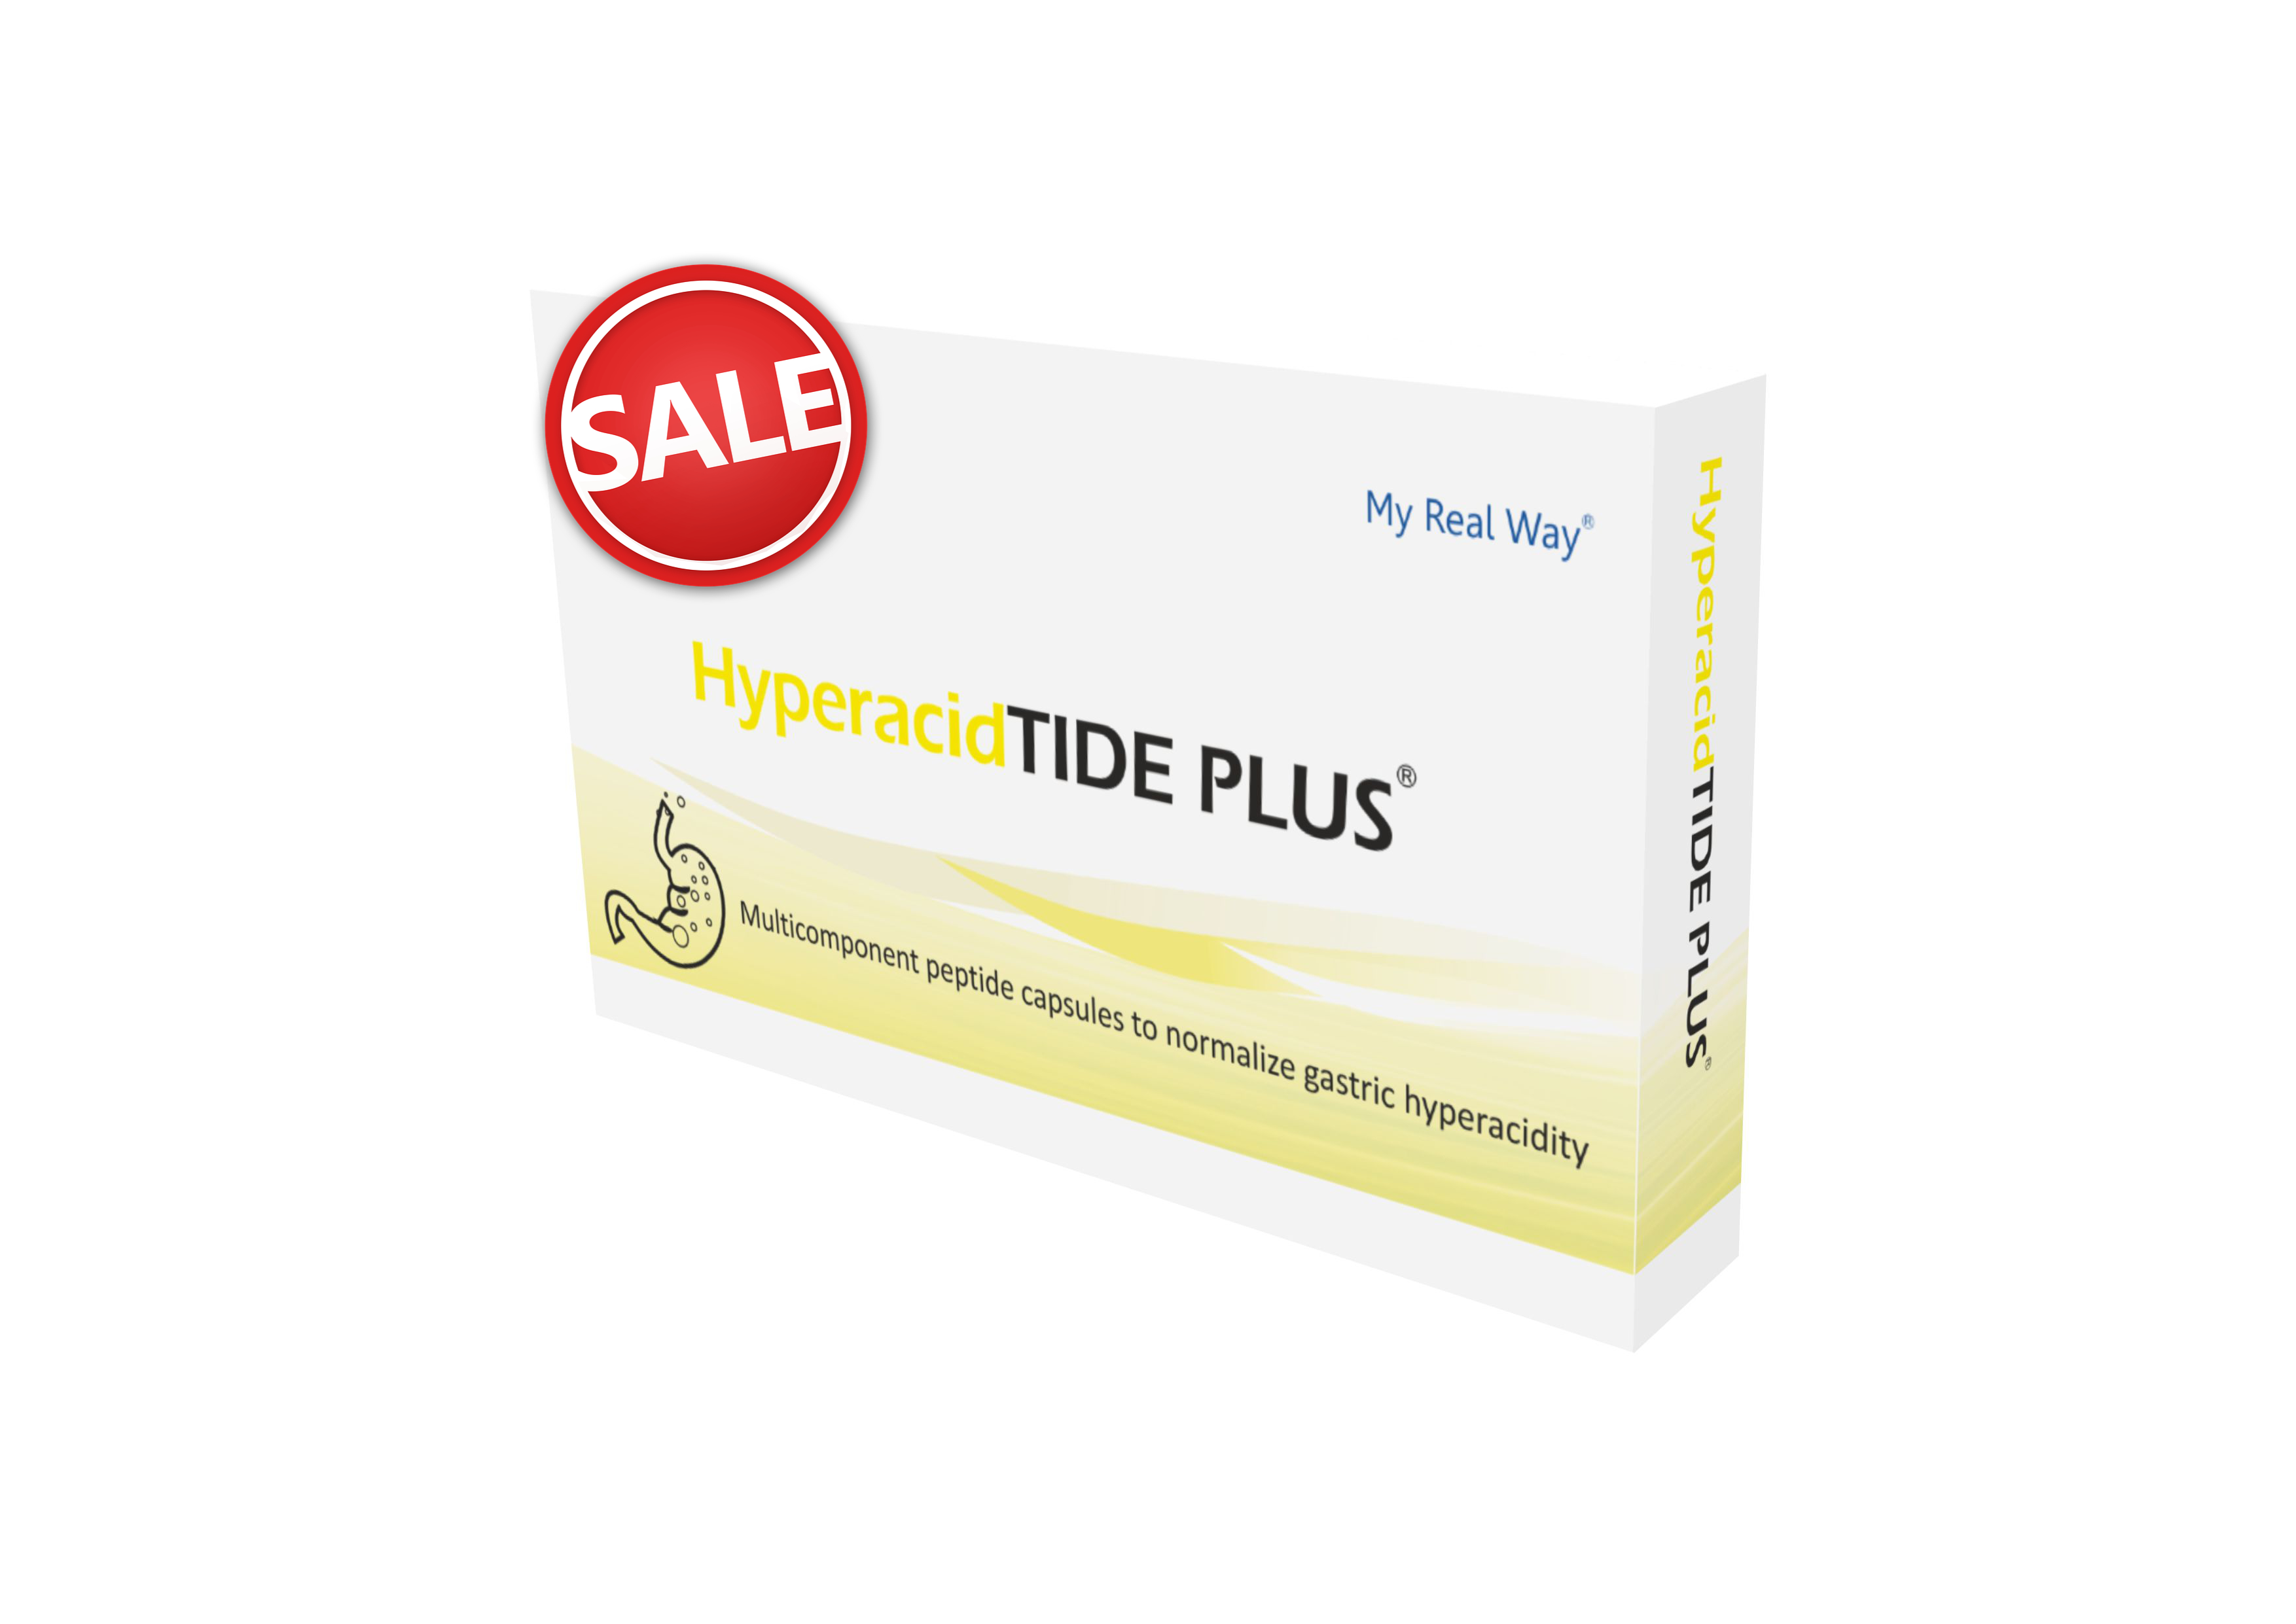 HyperacidTIDE PLUS peptides for gastric hyperacidity